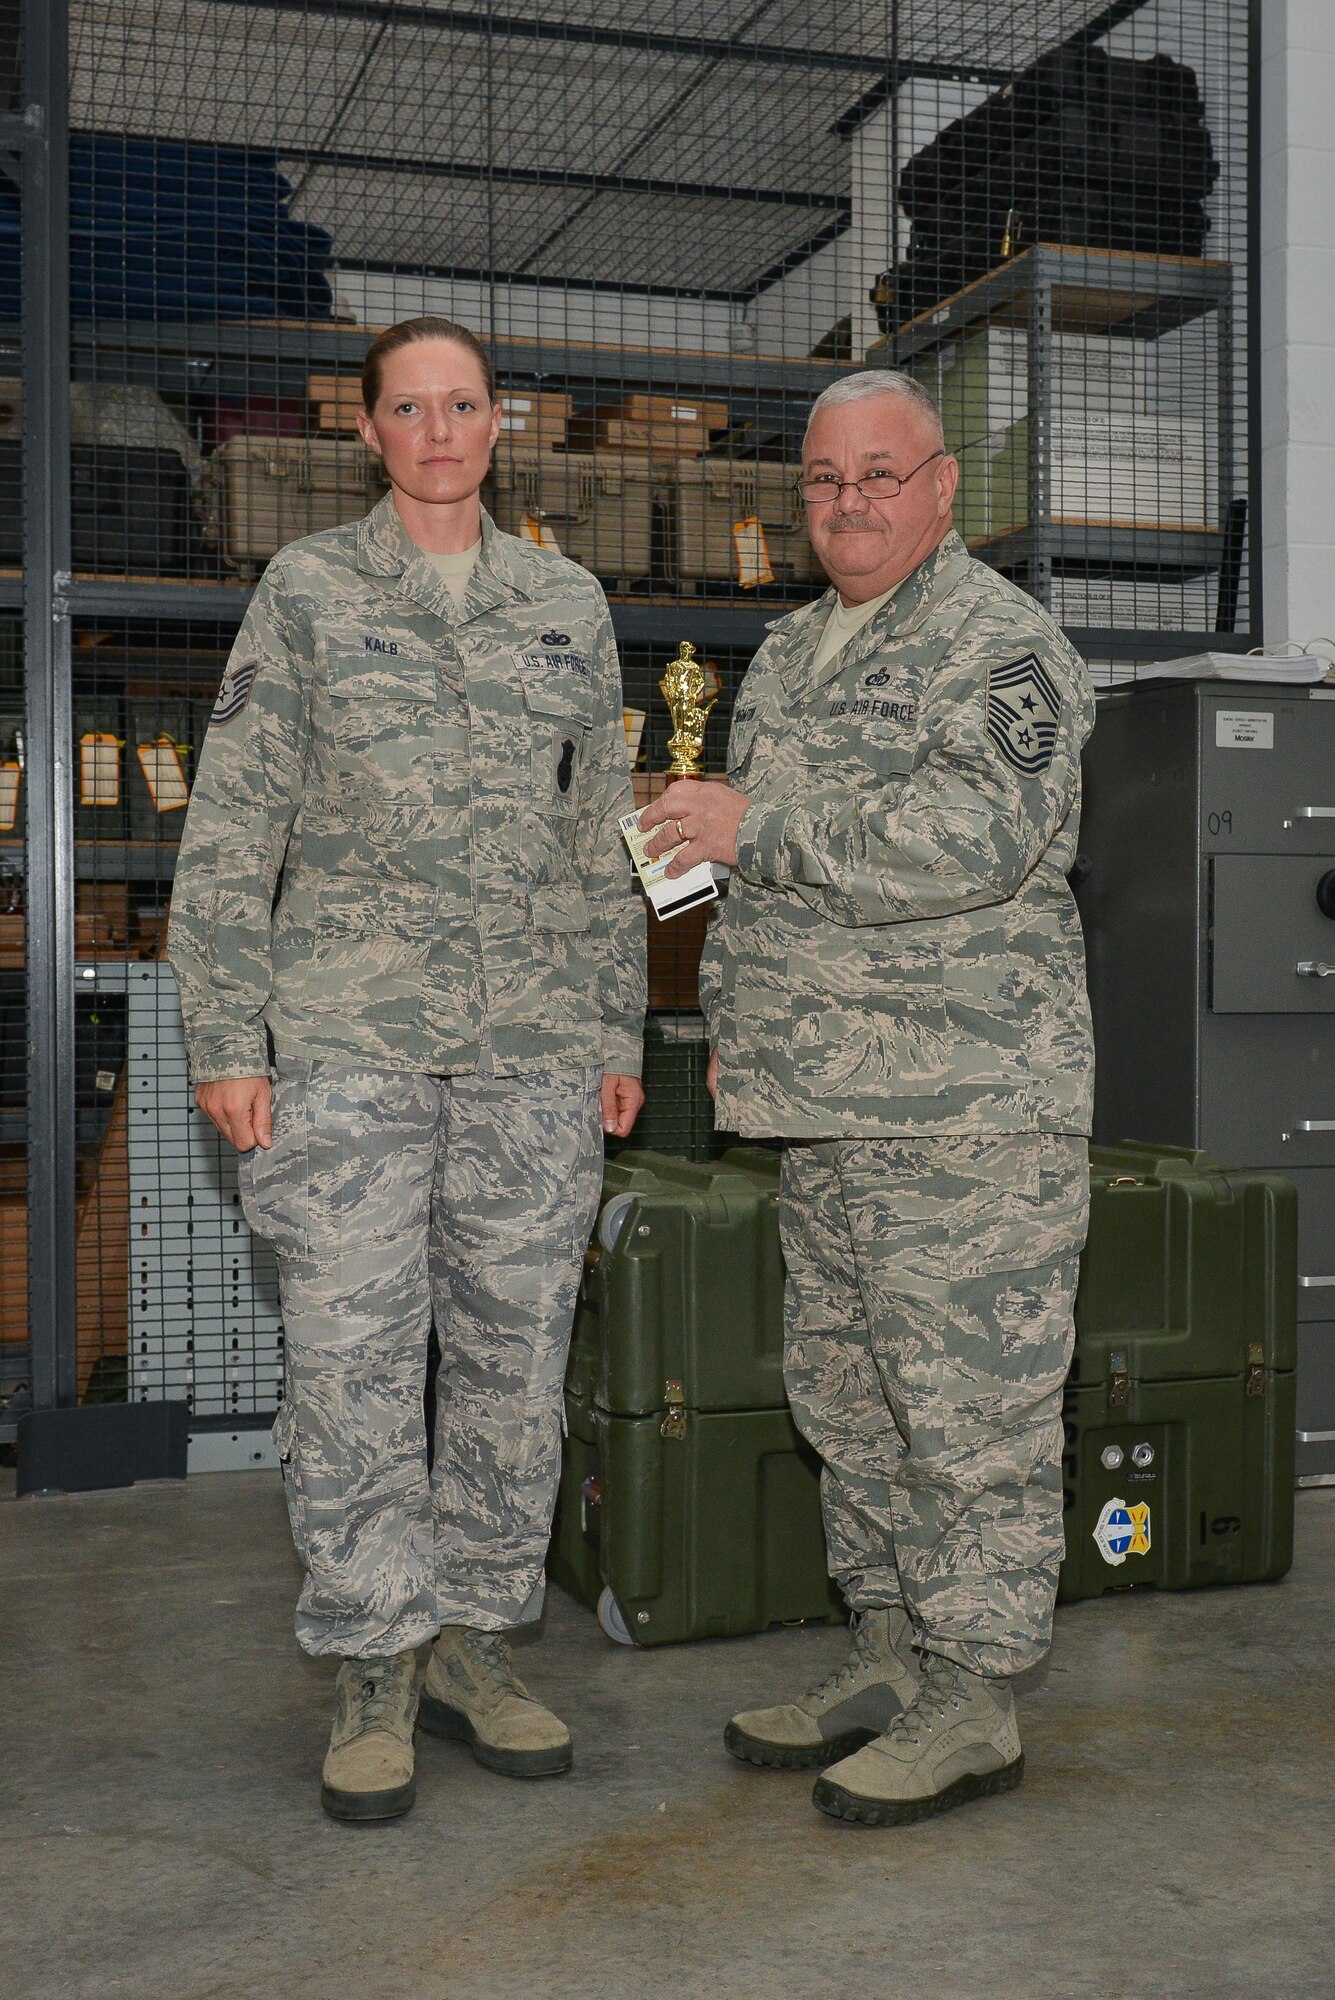 National Guard Tech. Sgt. Angela Kalb accepts the trophy for NCO of The Quarter, February 9, 2013 at Savannah Air National Guard Base in Garden City, Ga. Kalb is part of the 165th Airlift Wing Security Forces Squadron. (National Guard photo by Tech. Sgt. Charles Delano/released)